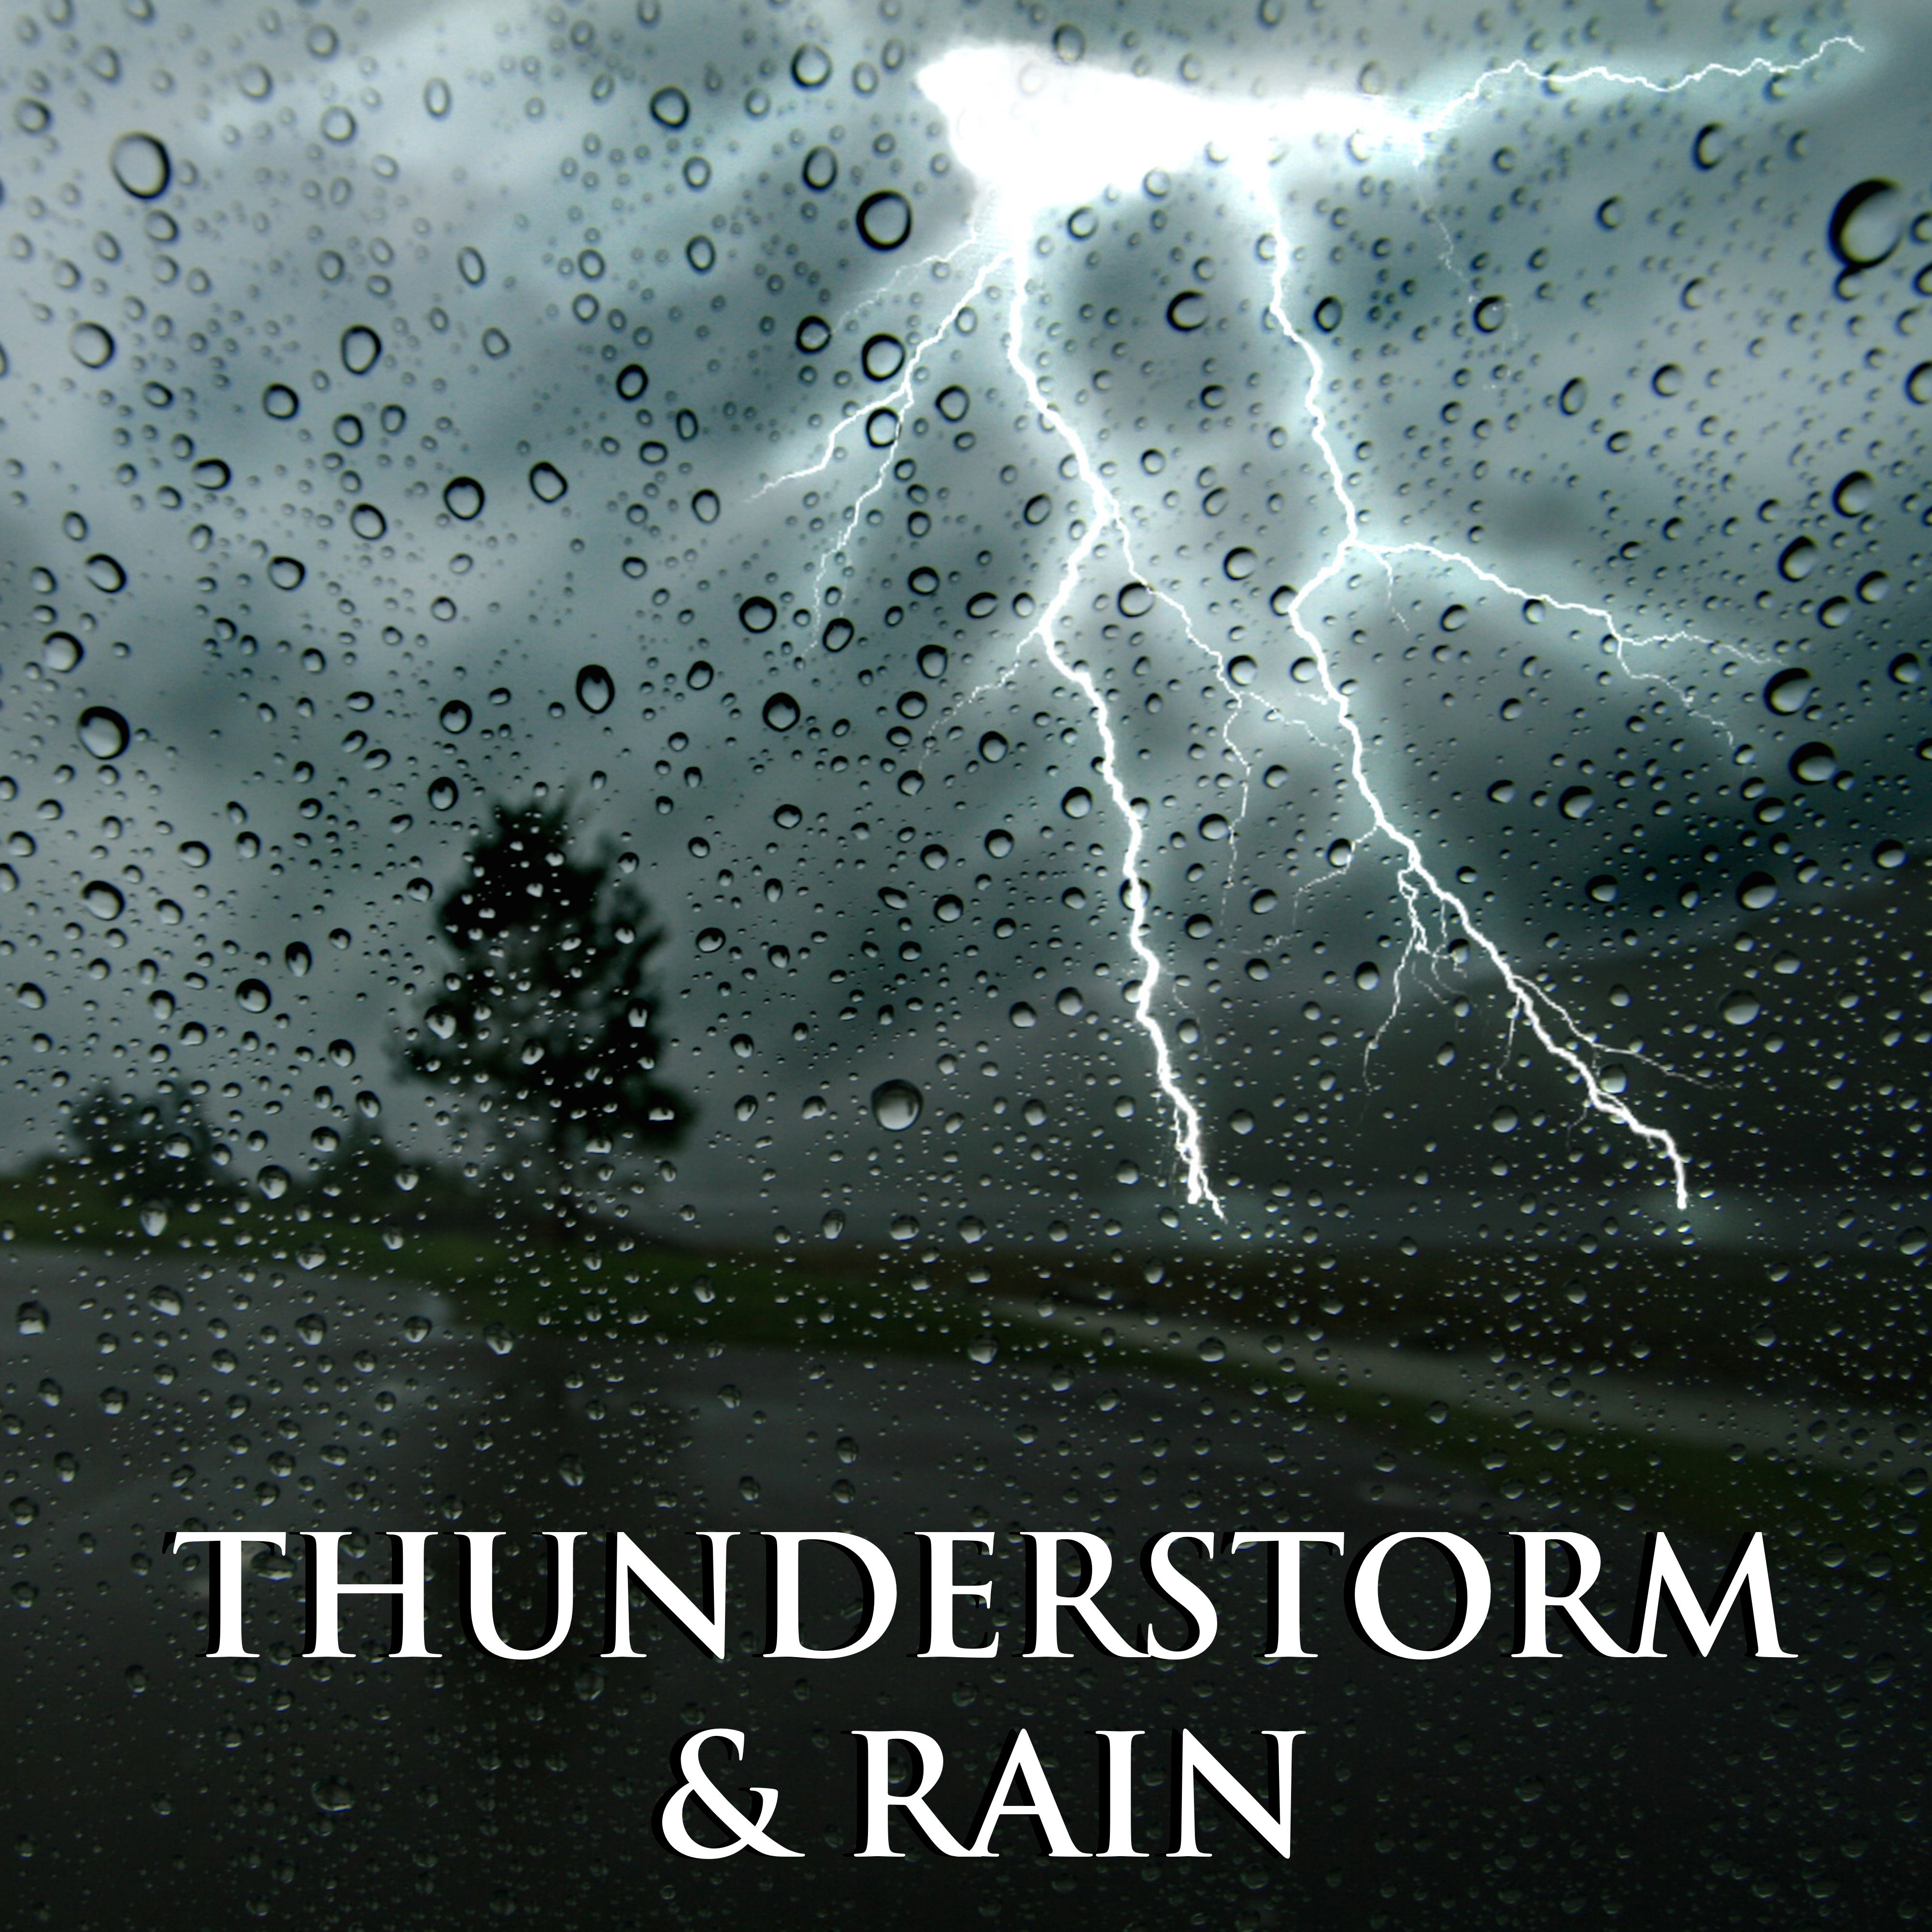 Distant Piano Music with Storm Sound Effect